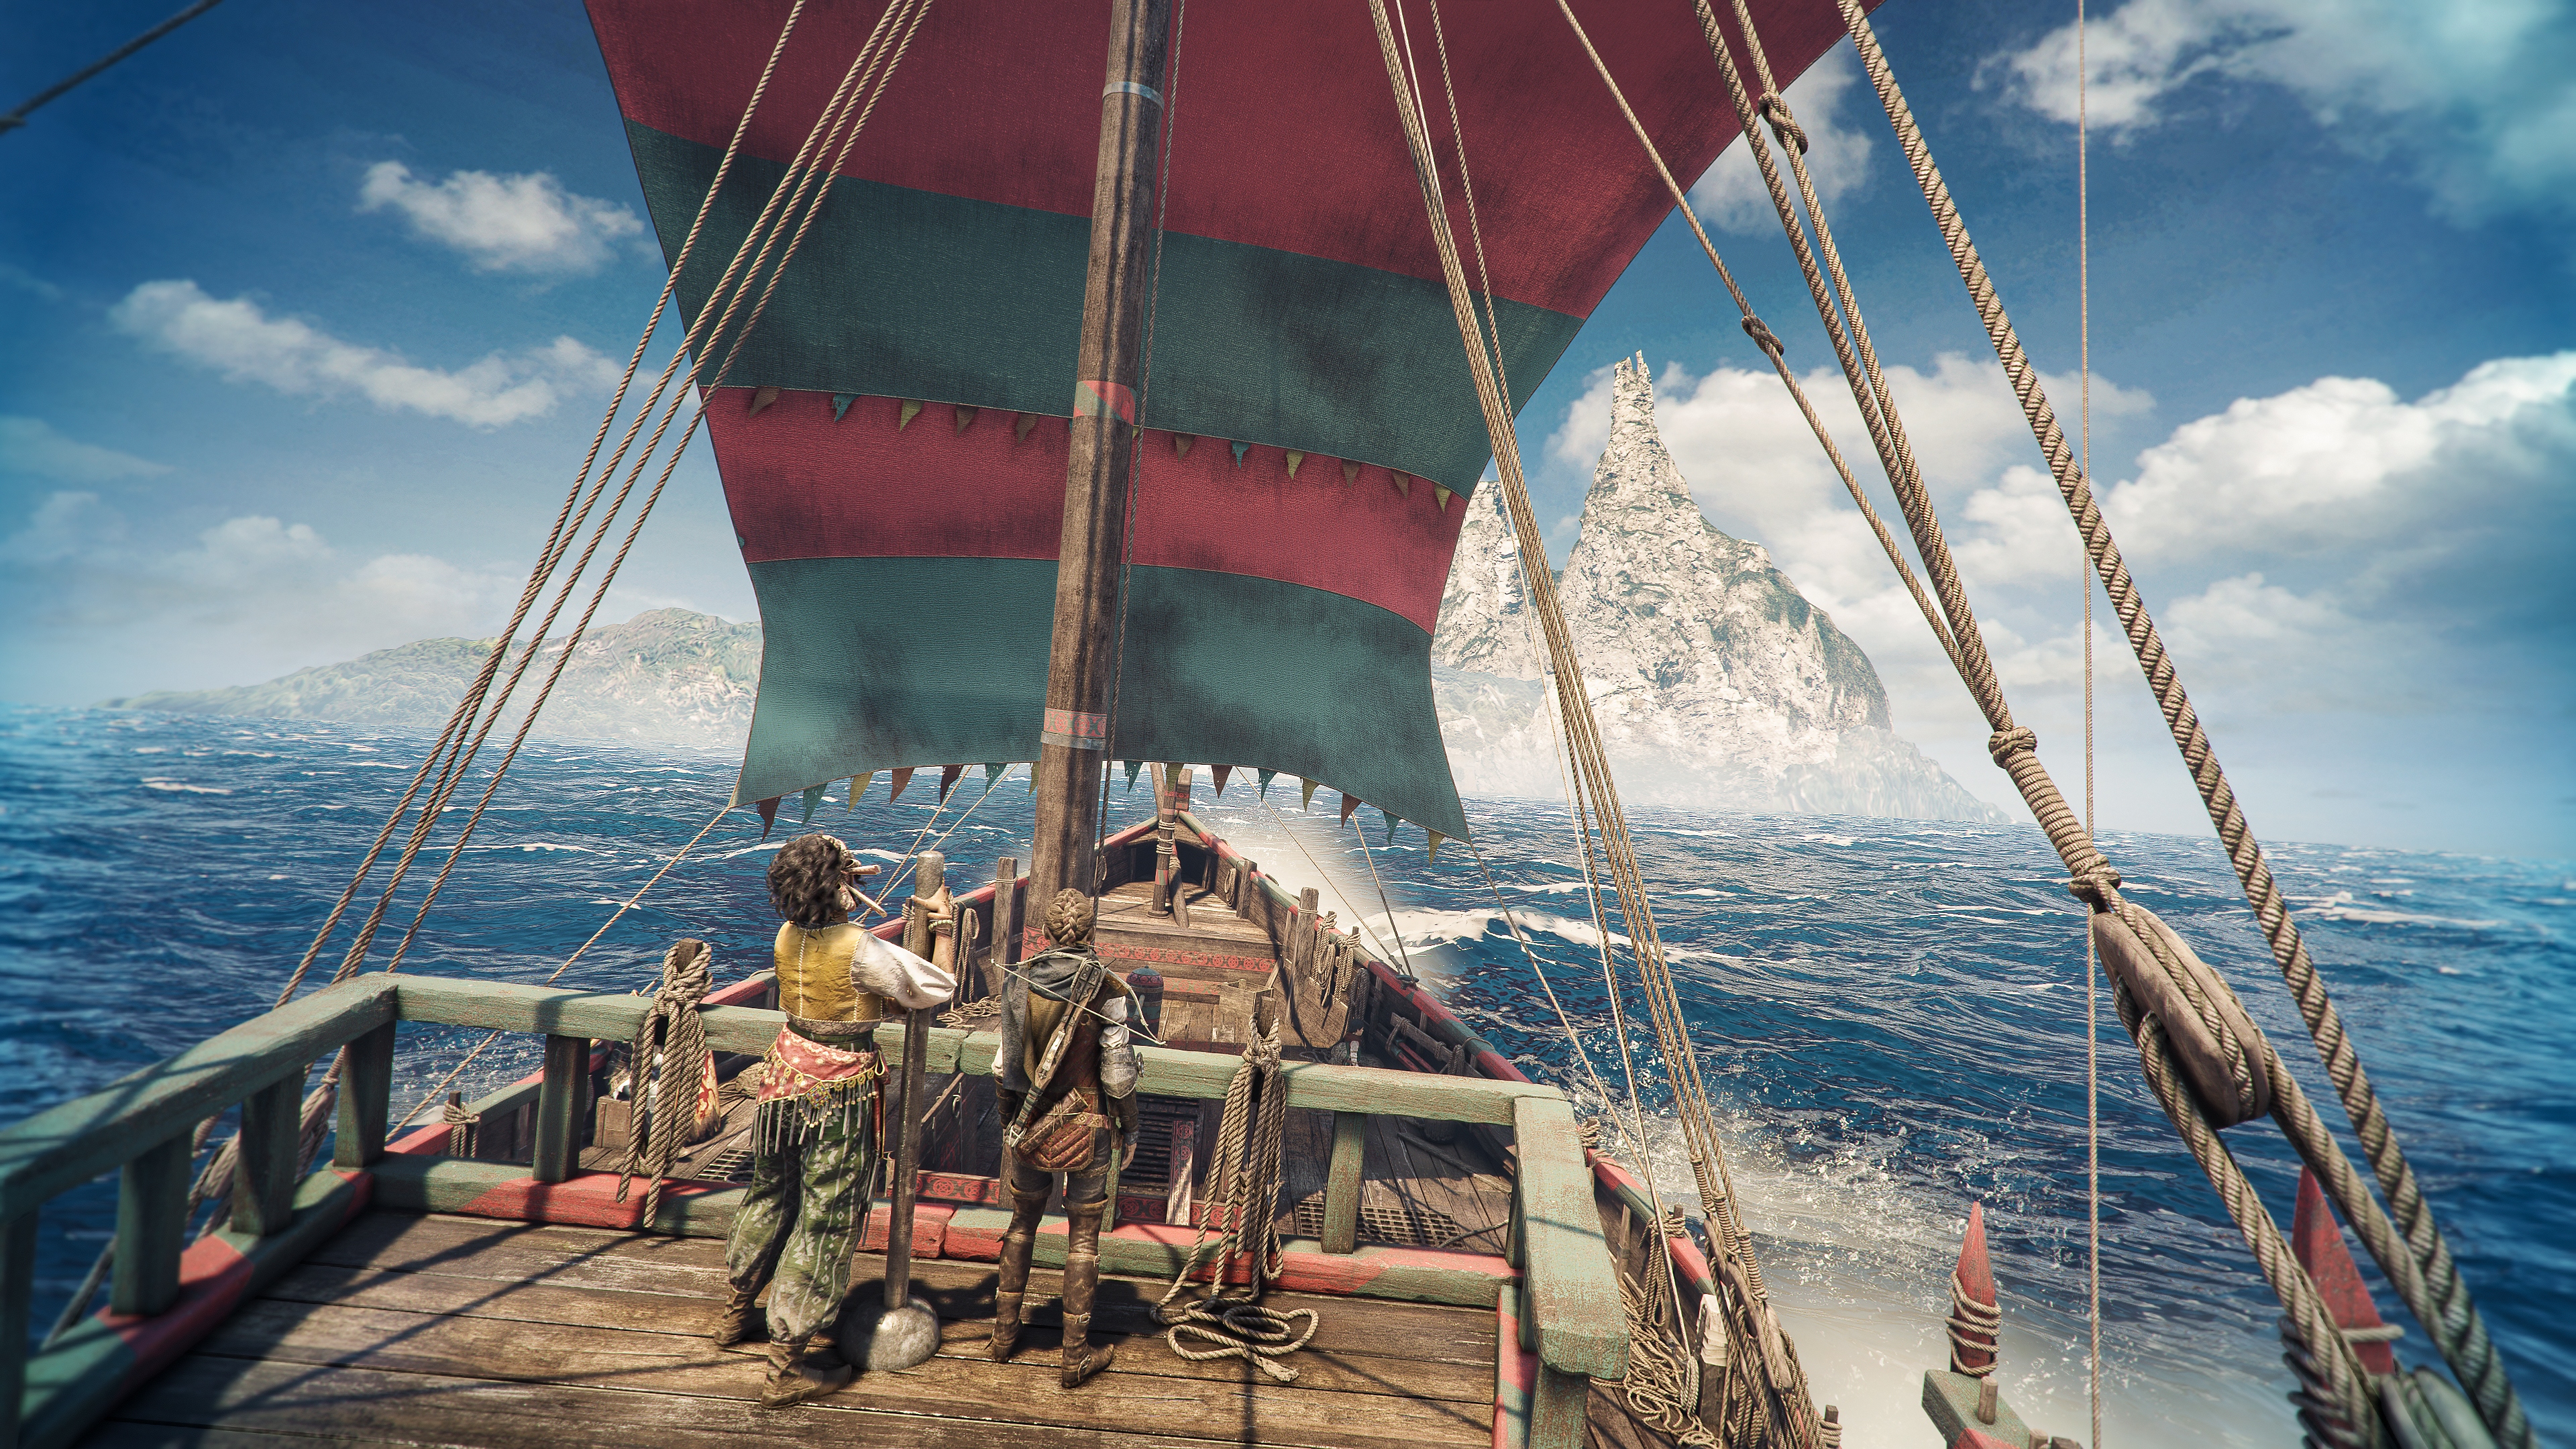 A Plague Tale: Requiem screenshot showing a ship with a red and green sail navigating the ocean